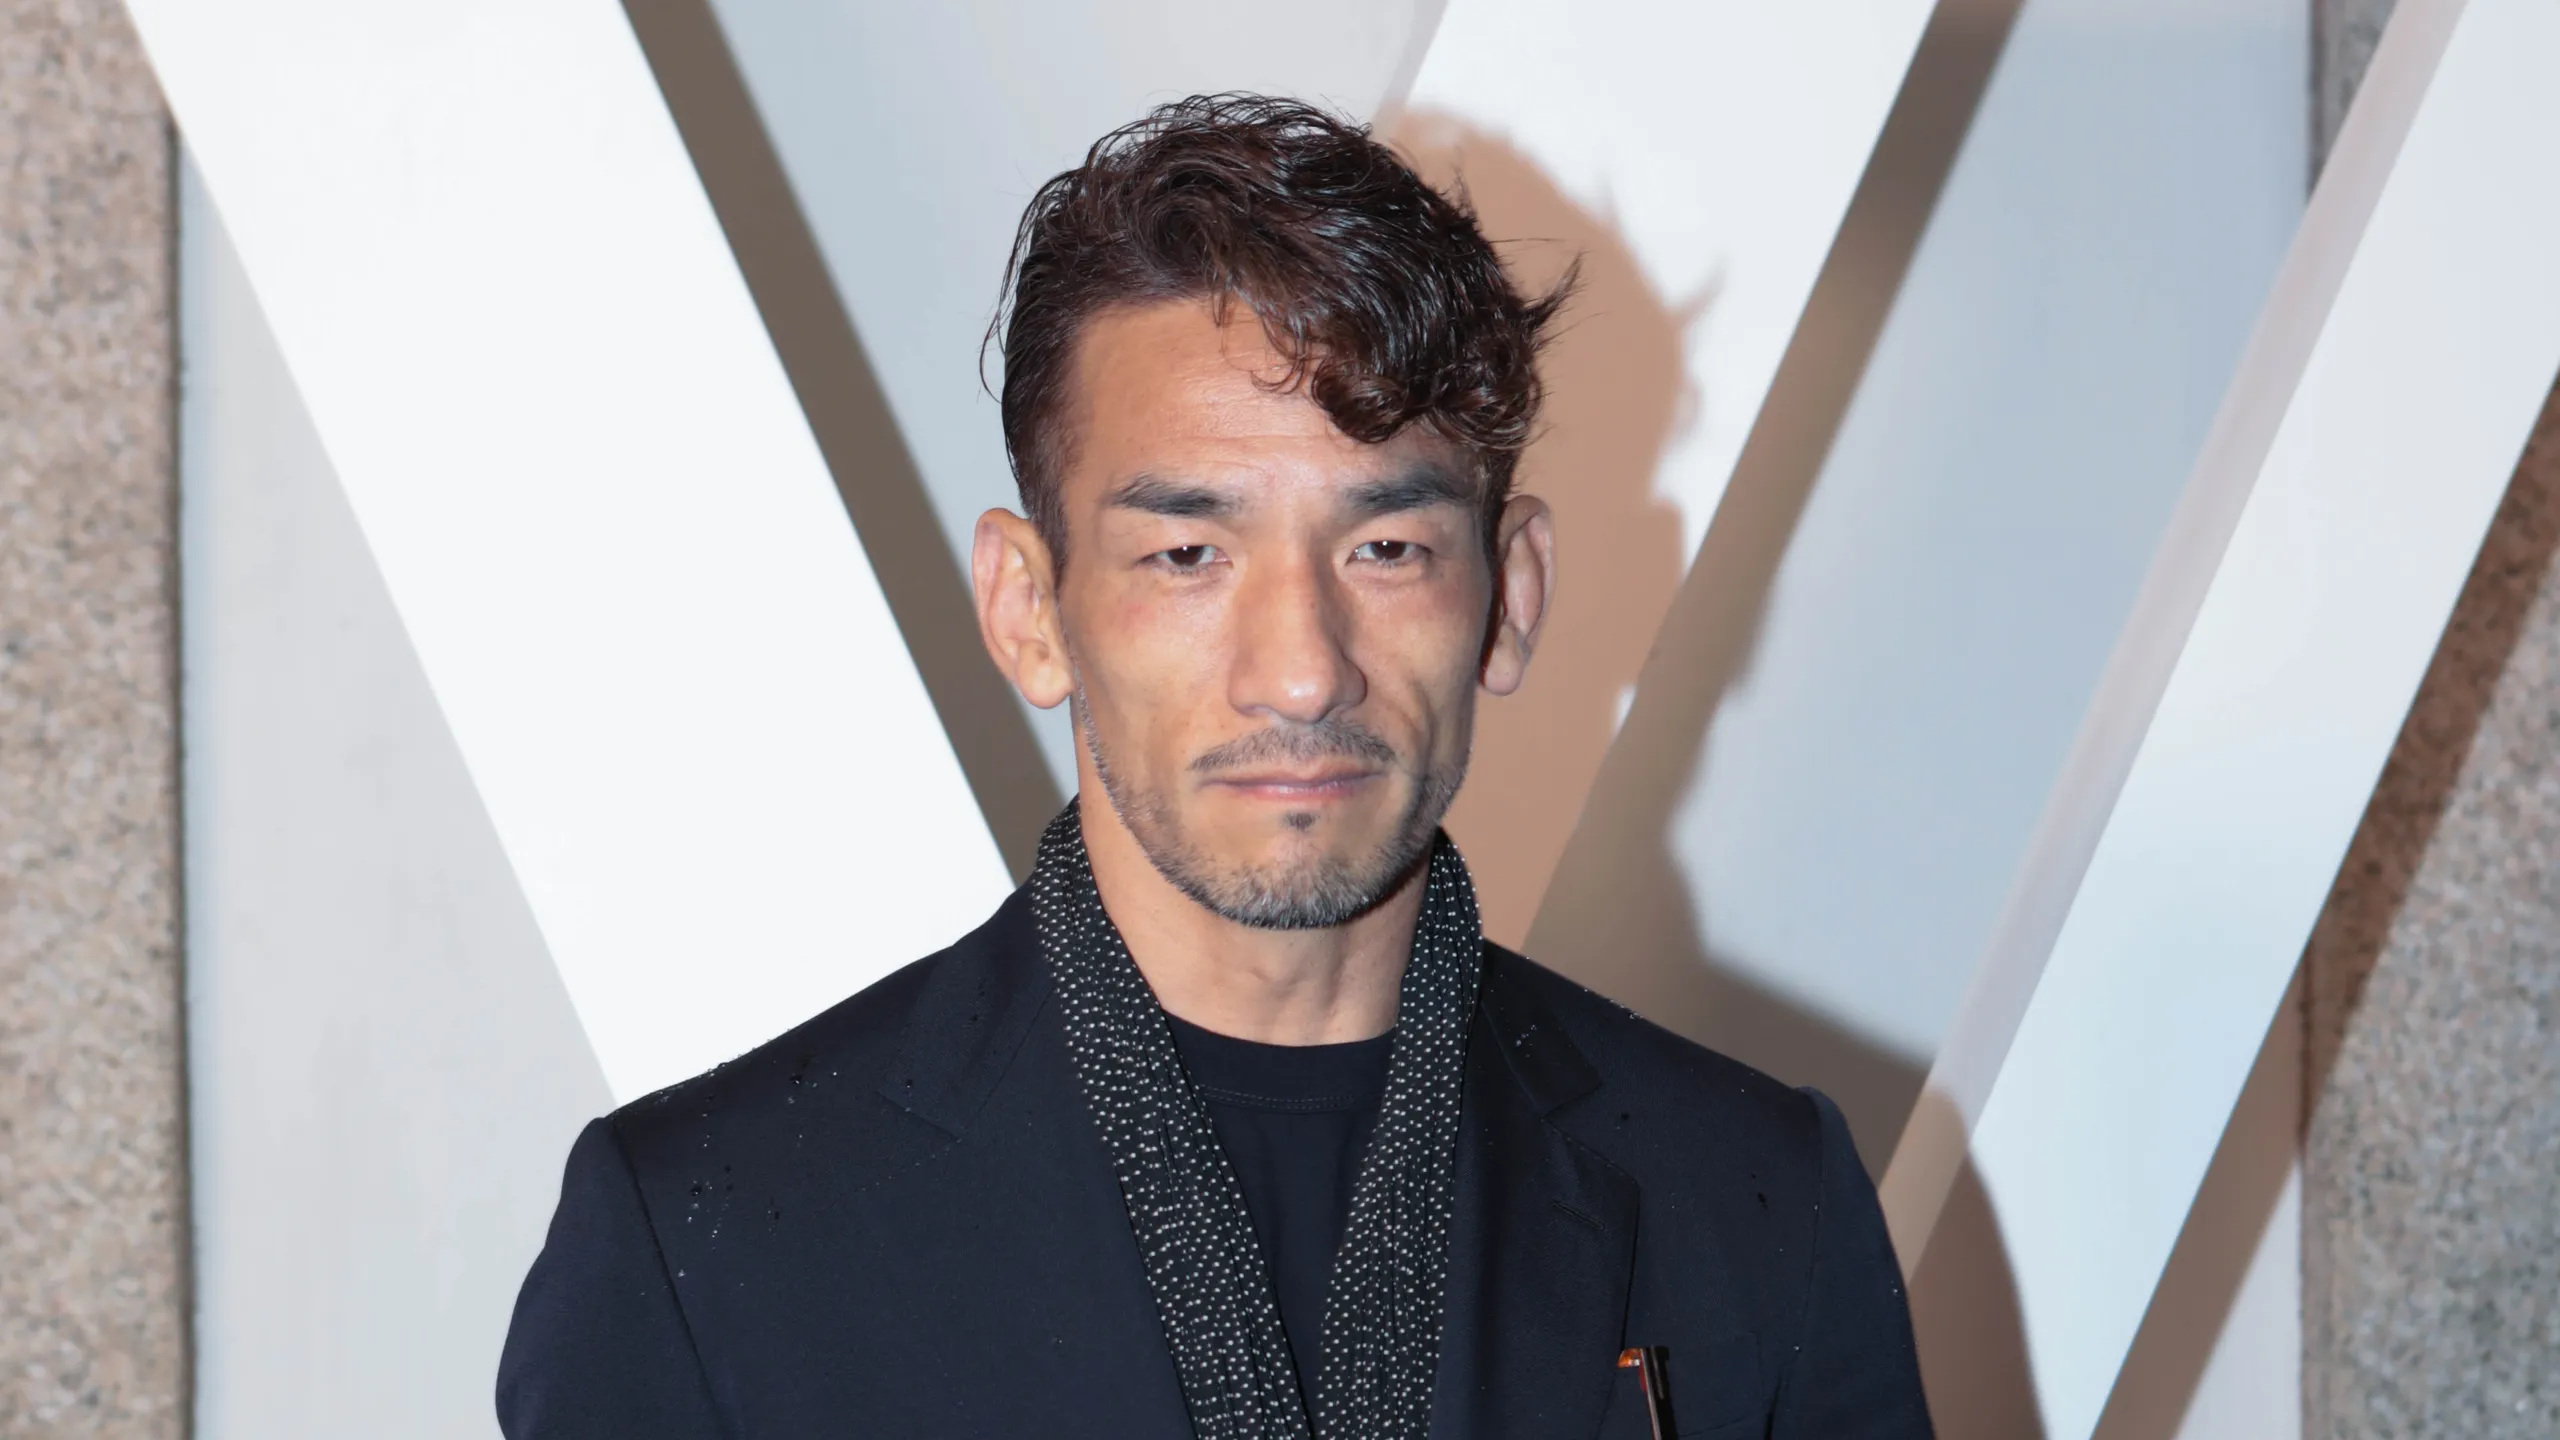 8 Astounding Facts About Hidetoshi Nakata - Facts.net